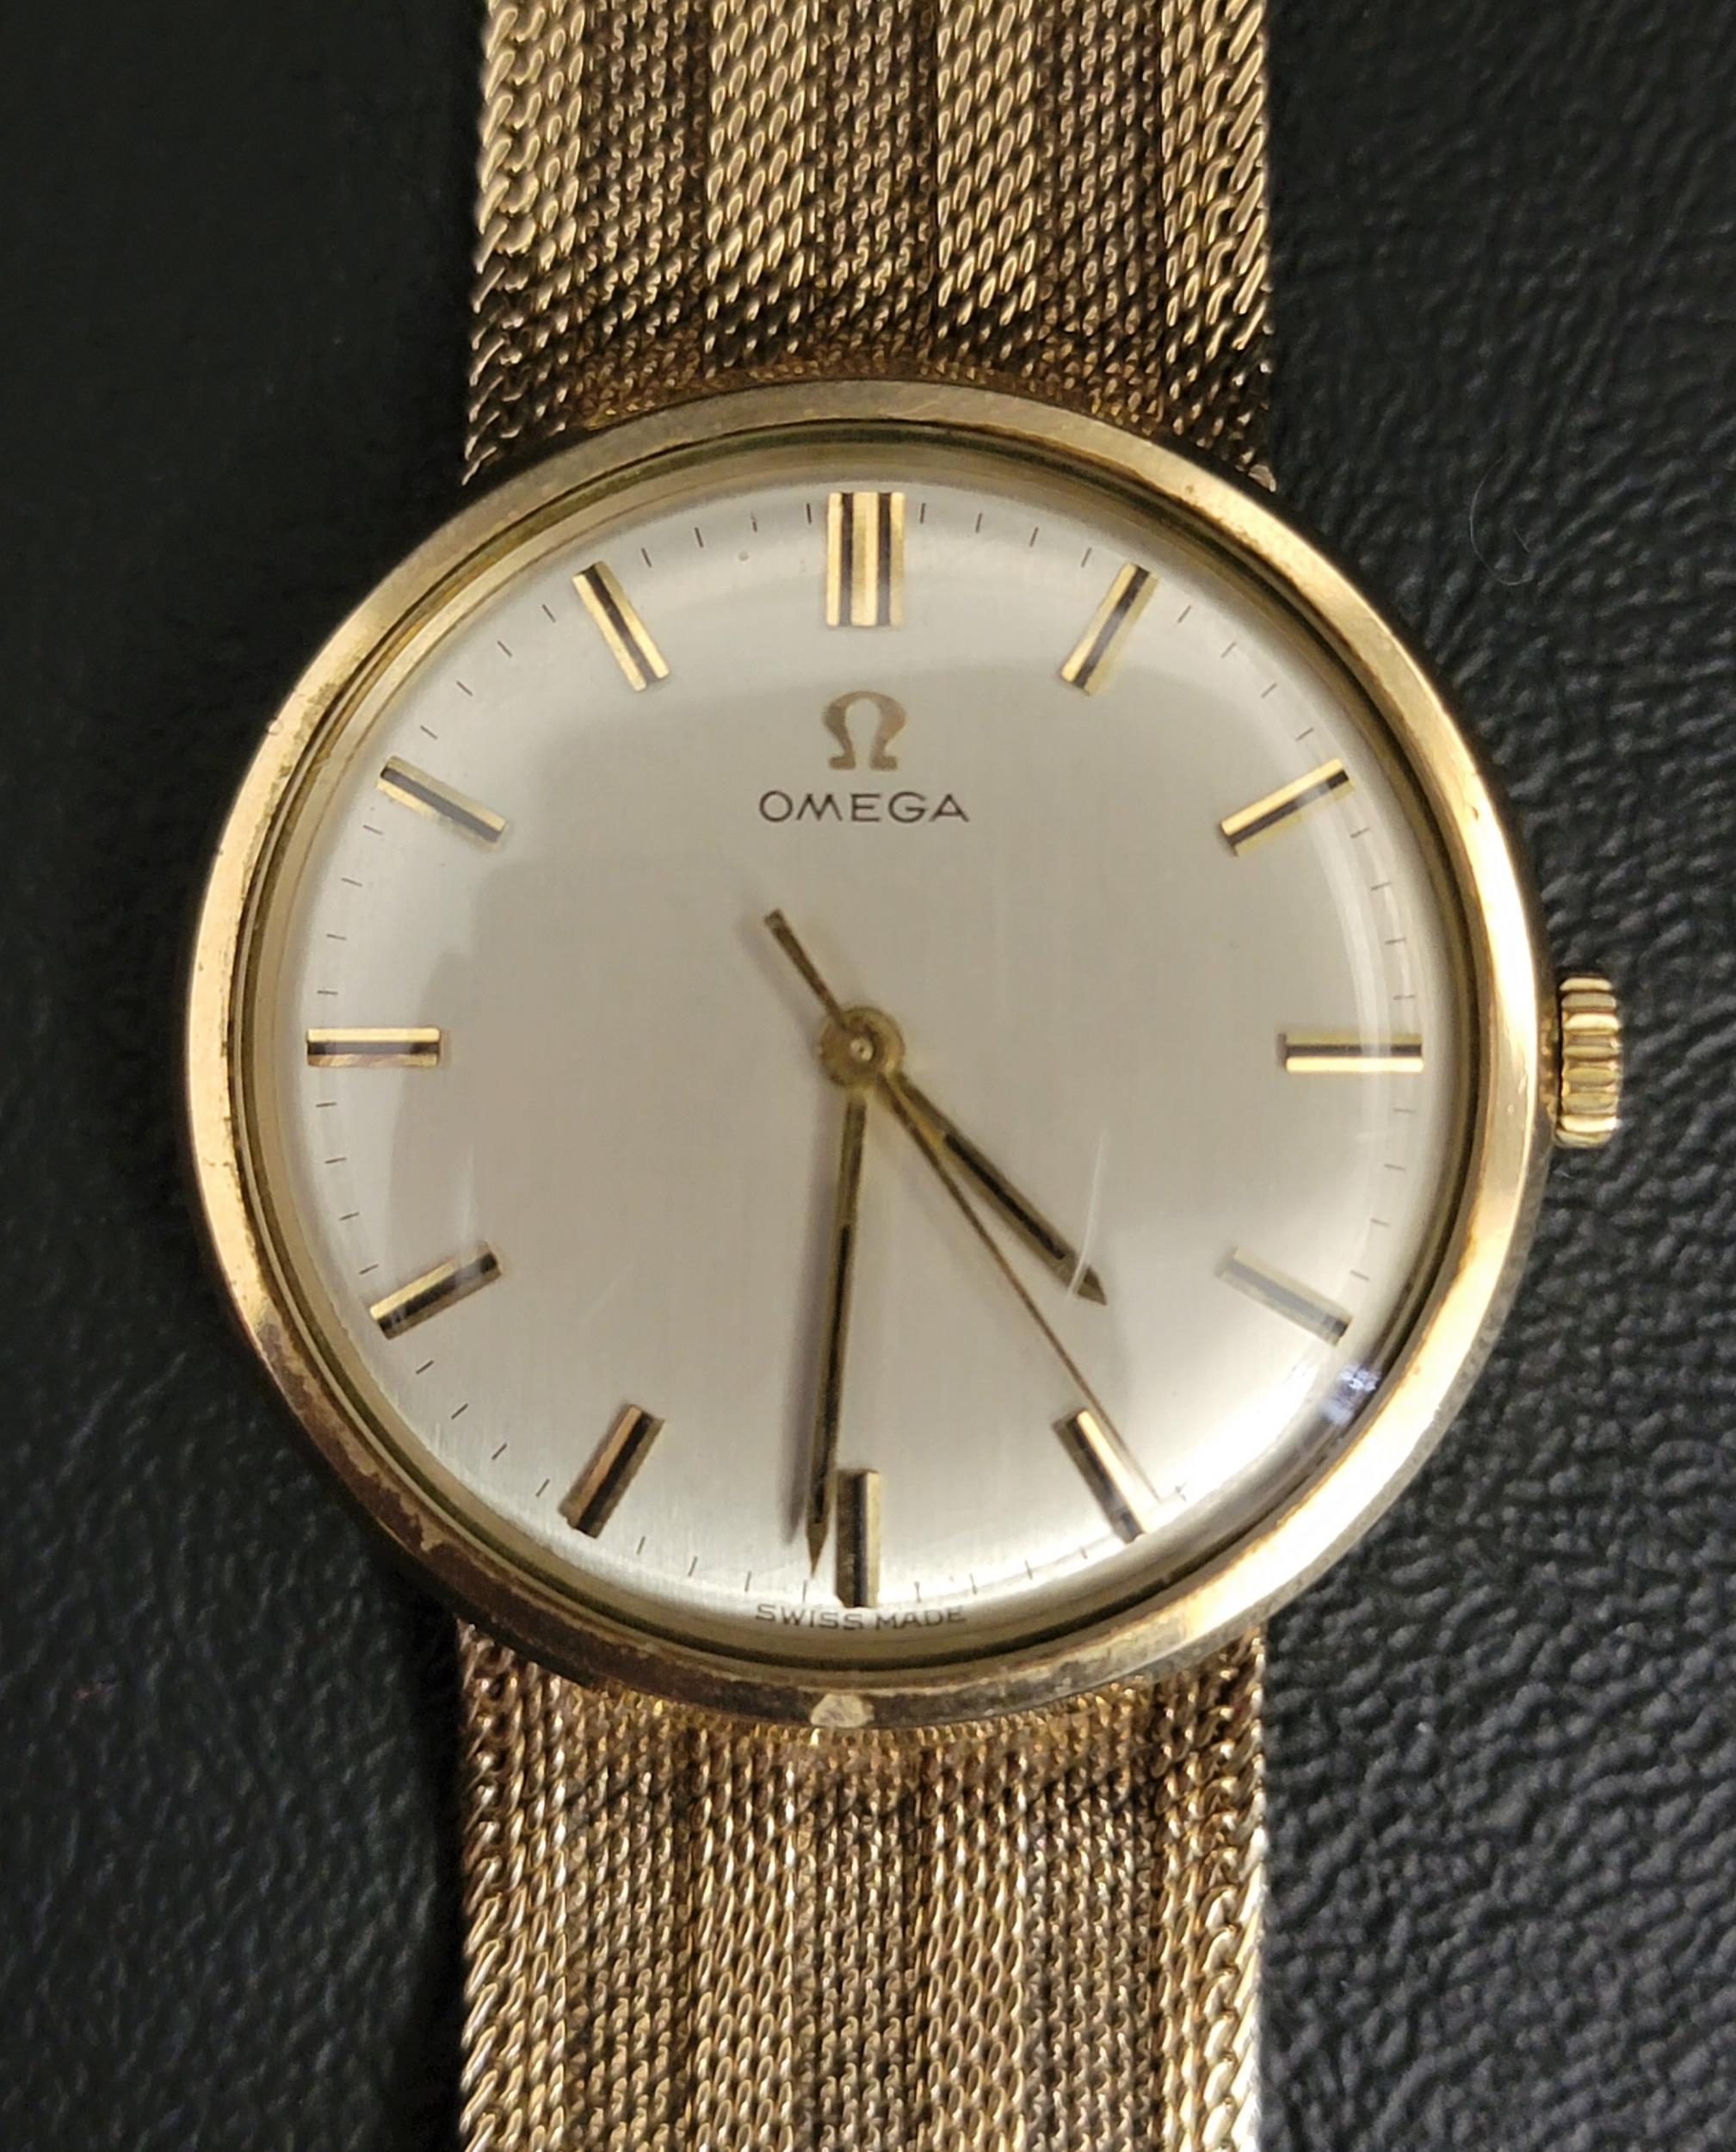 GENTLEMAN'S OMEGA NINE CARAT GOLD WRISTWATCH the champagne dial with baton five minute markers,